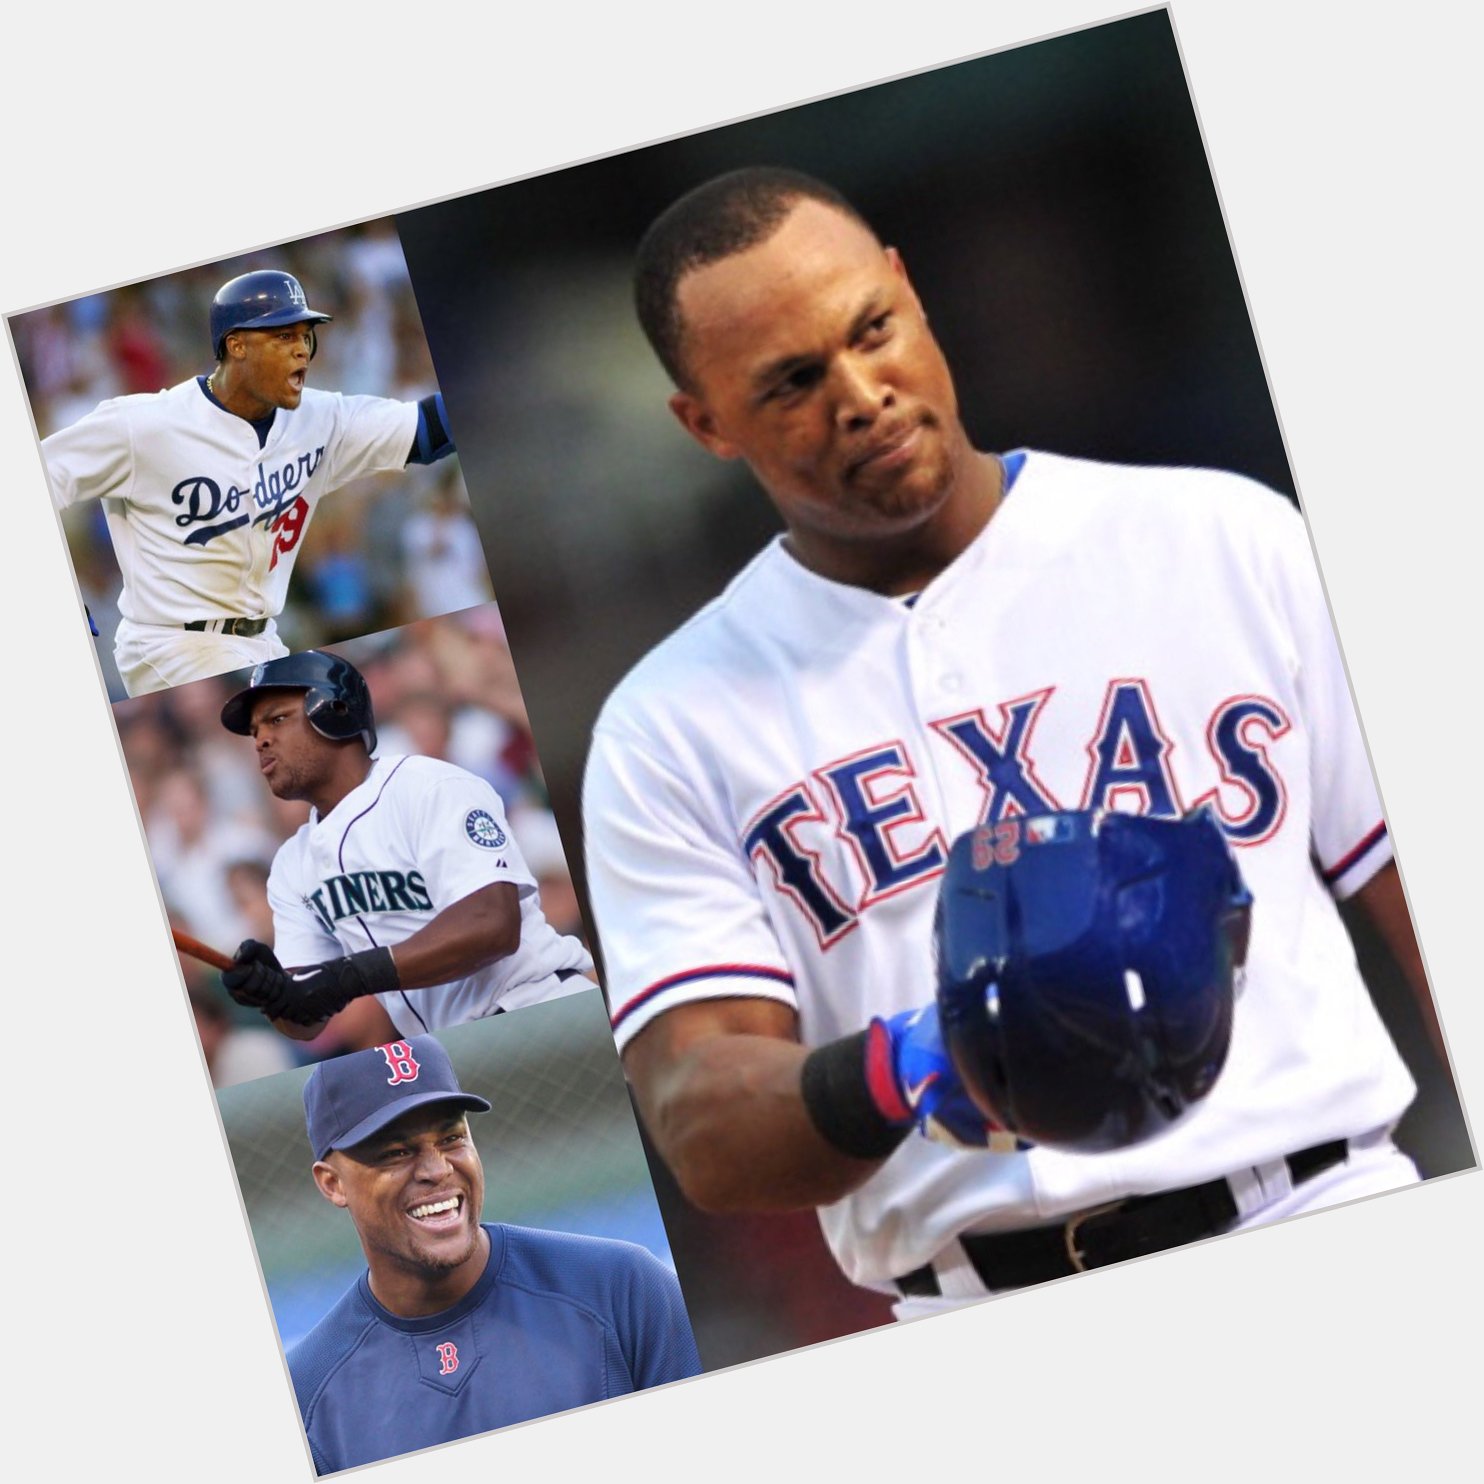 Happy birthday to Adrian Beltre, who passed through LA, Seattle and Boston before becoming a Hall of Famer in Texas 